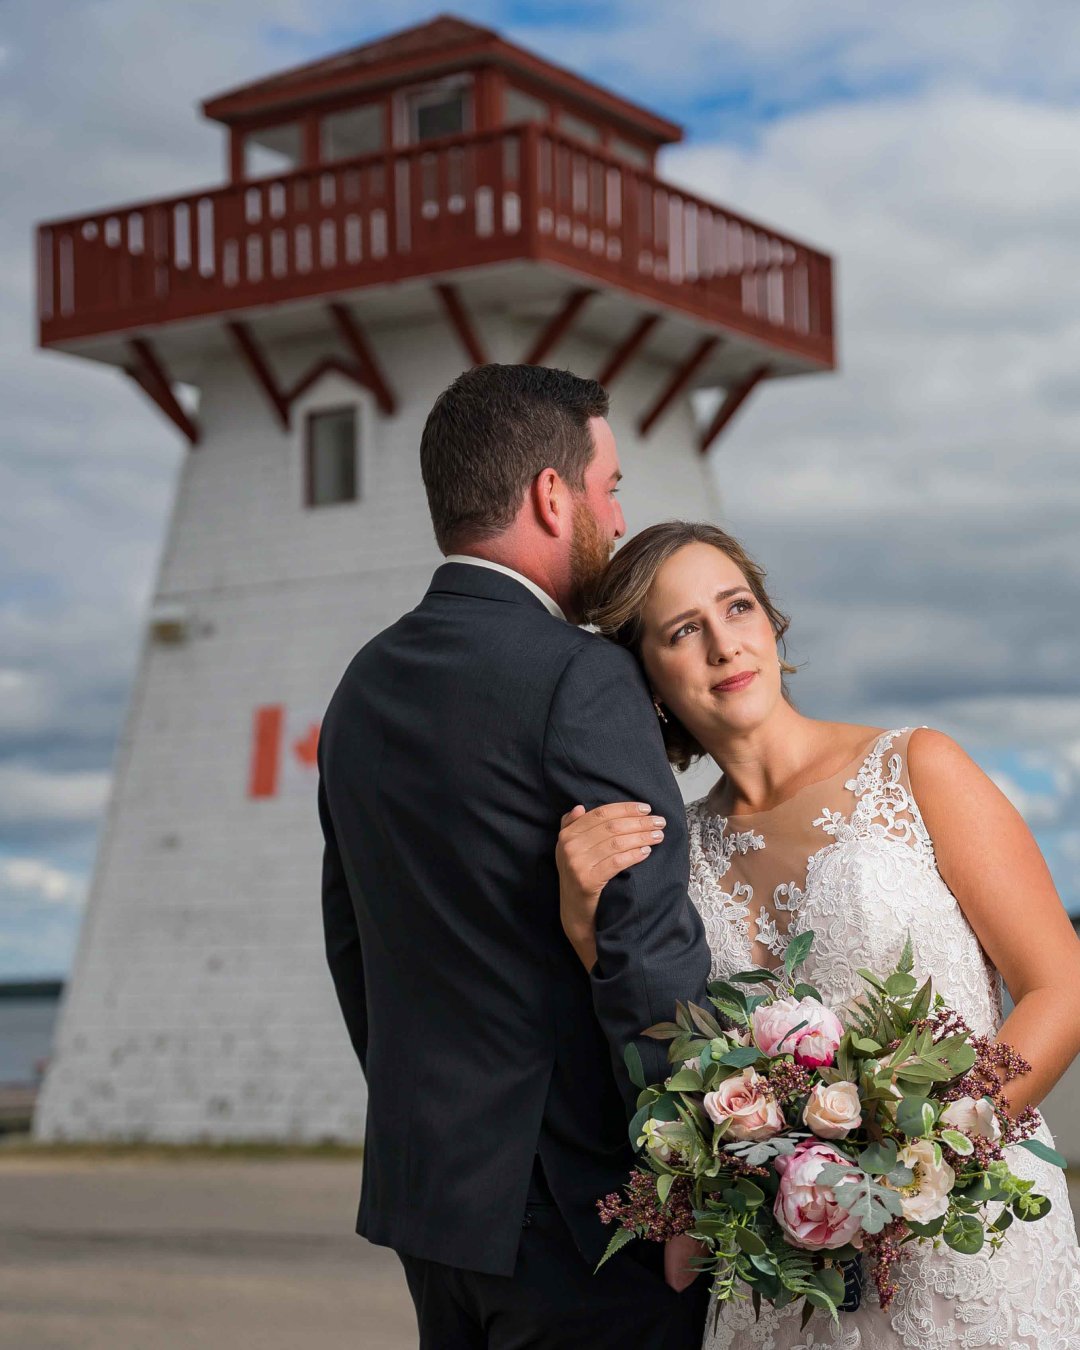 The town of Hecla has so many photo opportunities! Be sure to run into town for a quick session if you&rsquo;re getting married on Hecla Island. 

#winnipegweddingphotographer #couplesportraits #couplesphotos #creativeweddingphotographer #candidweddi